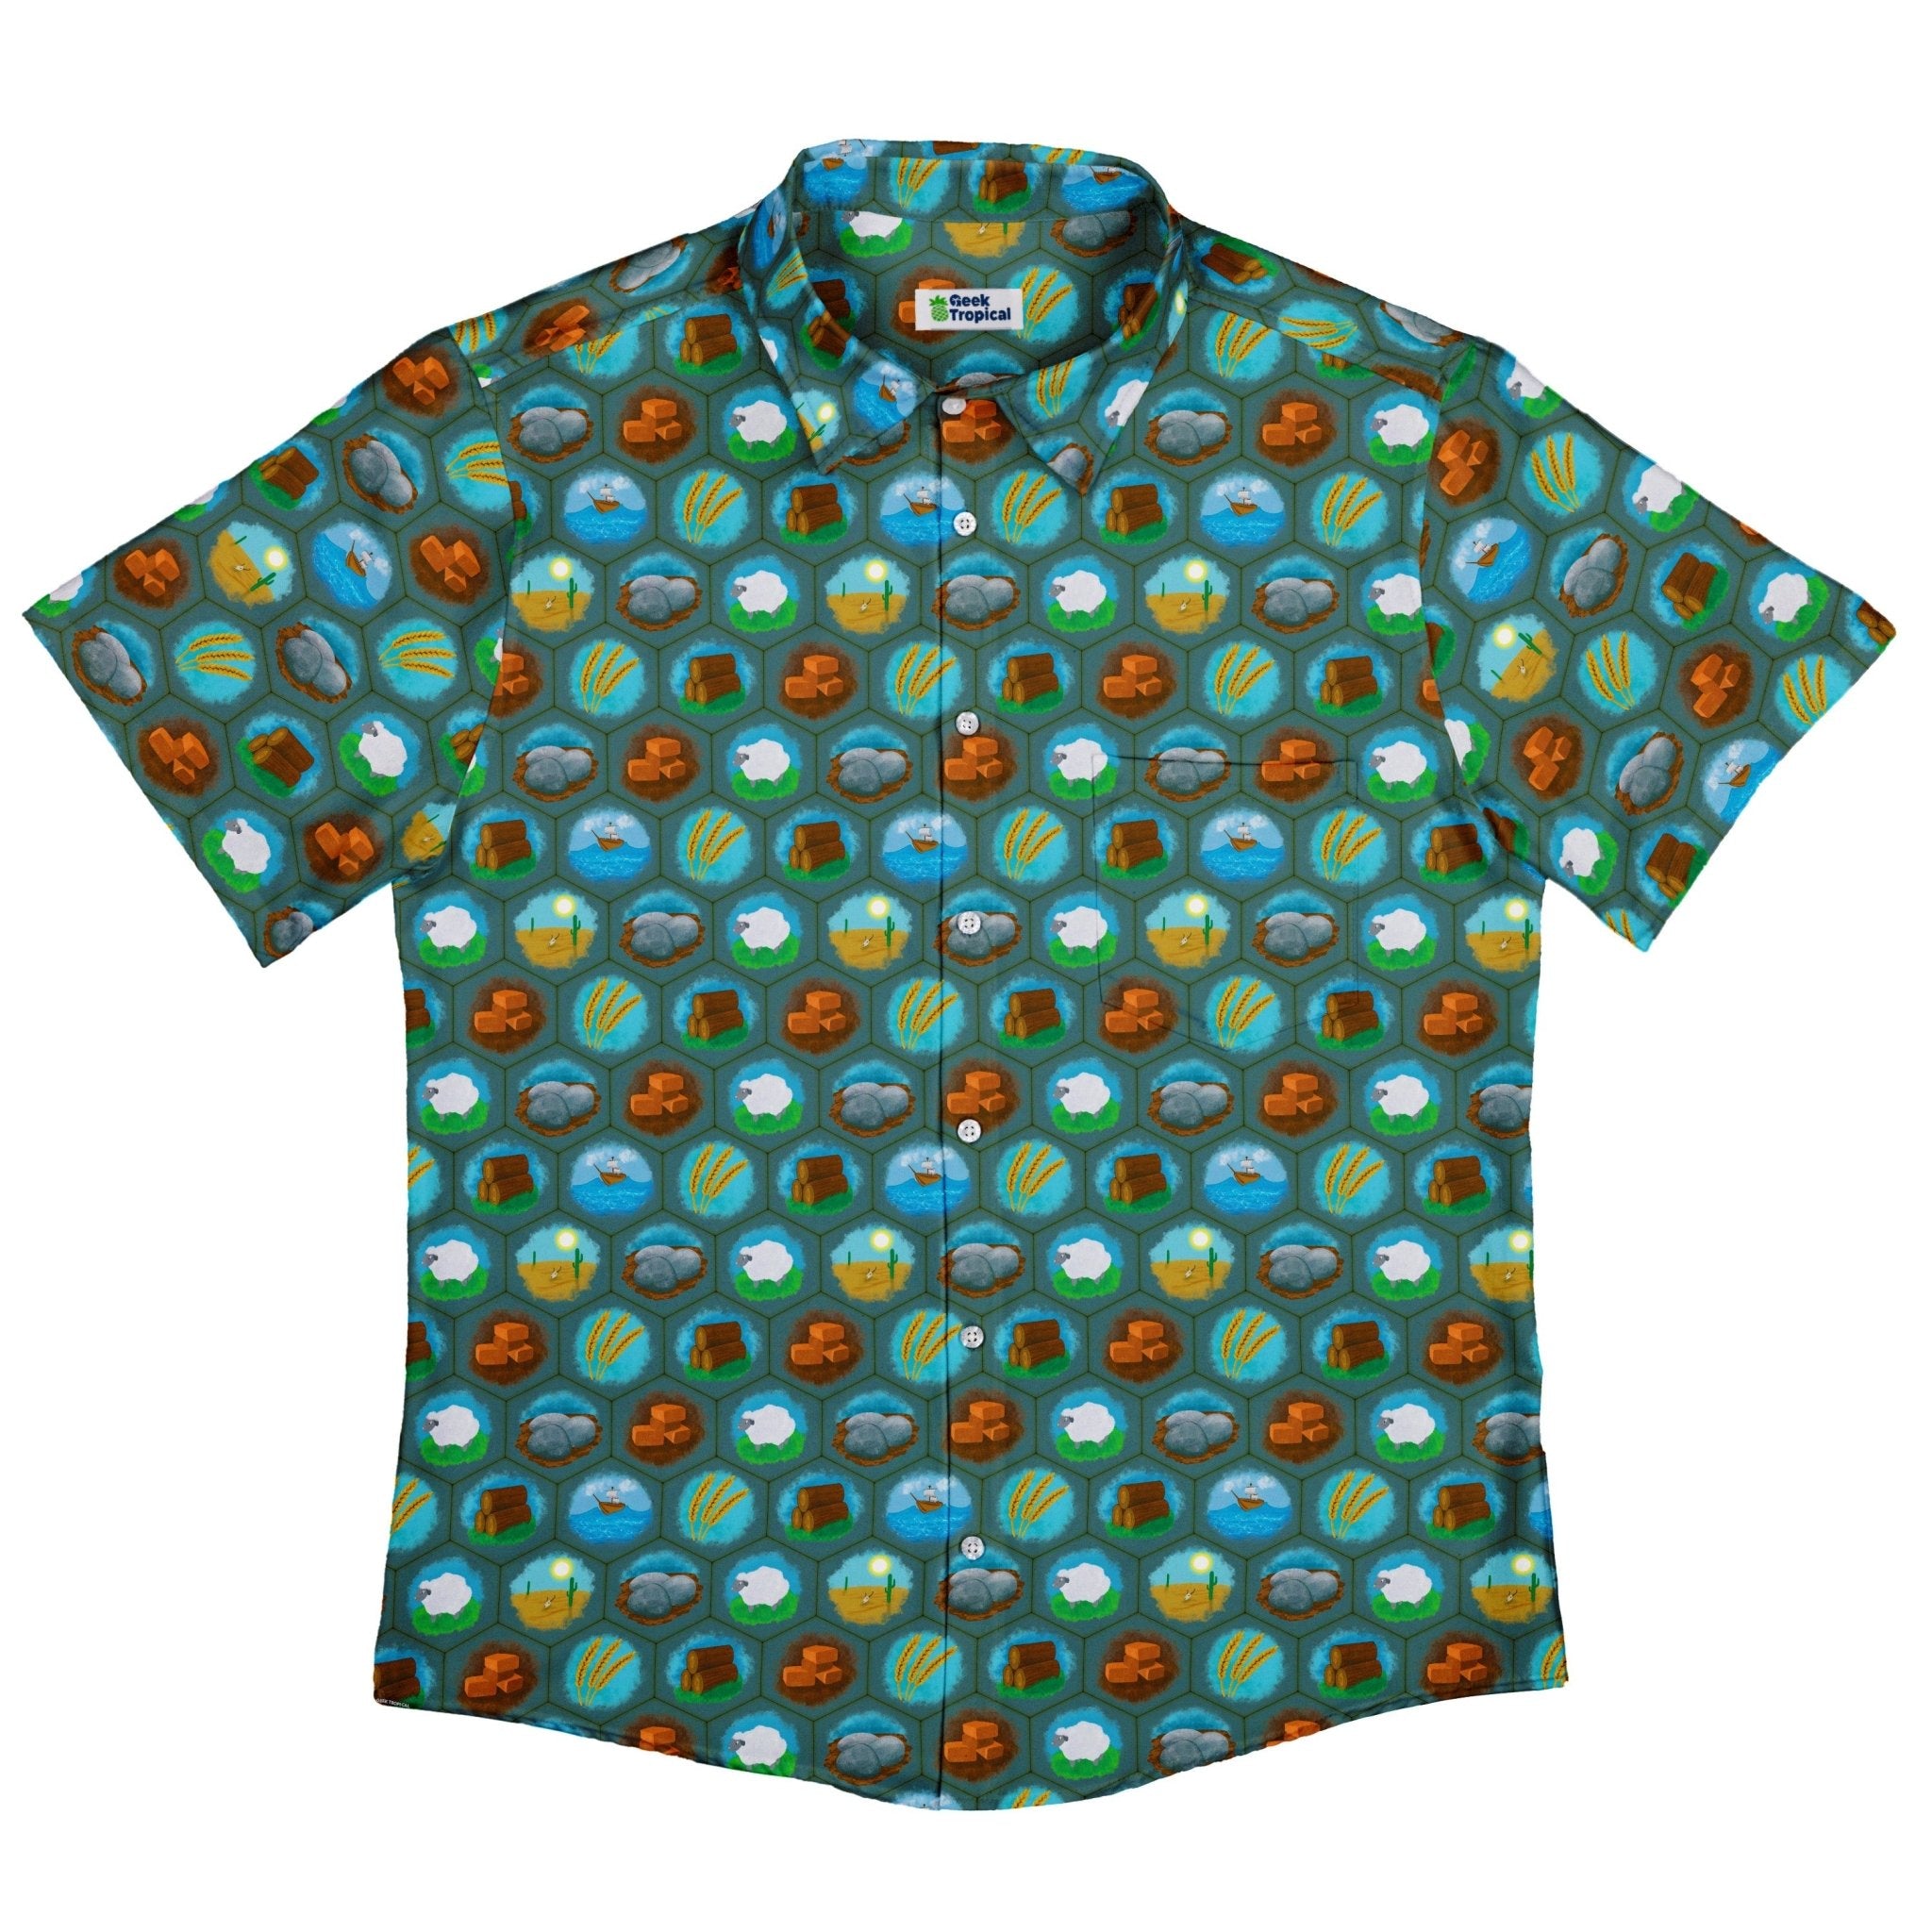 Hexagon Tile Game Symbols Button Up Shirt - adult sizing - board game print - Designs by Nathan